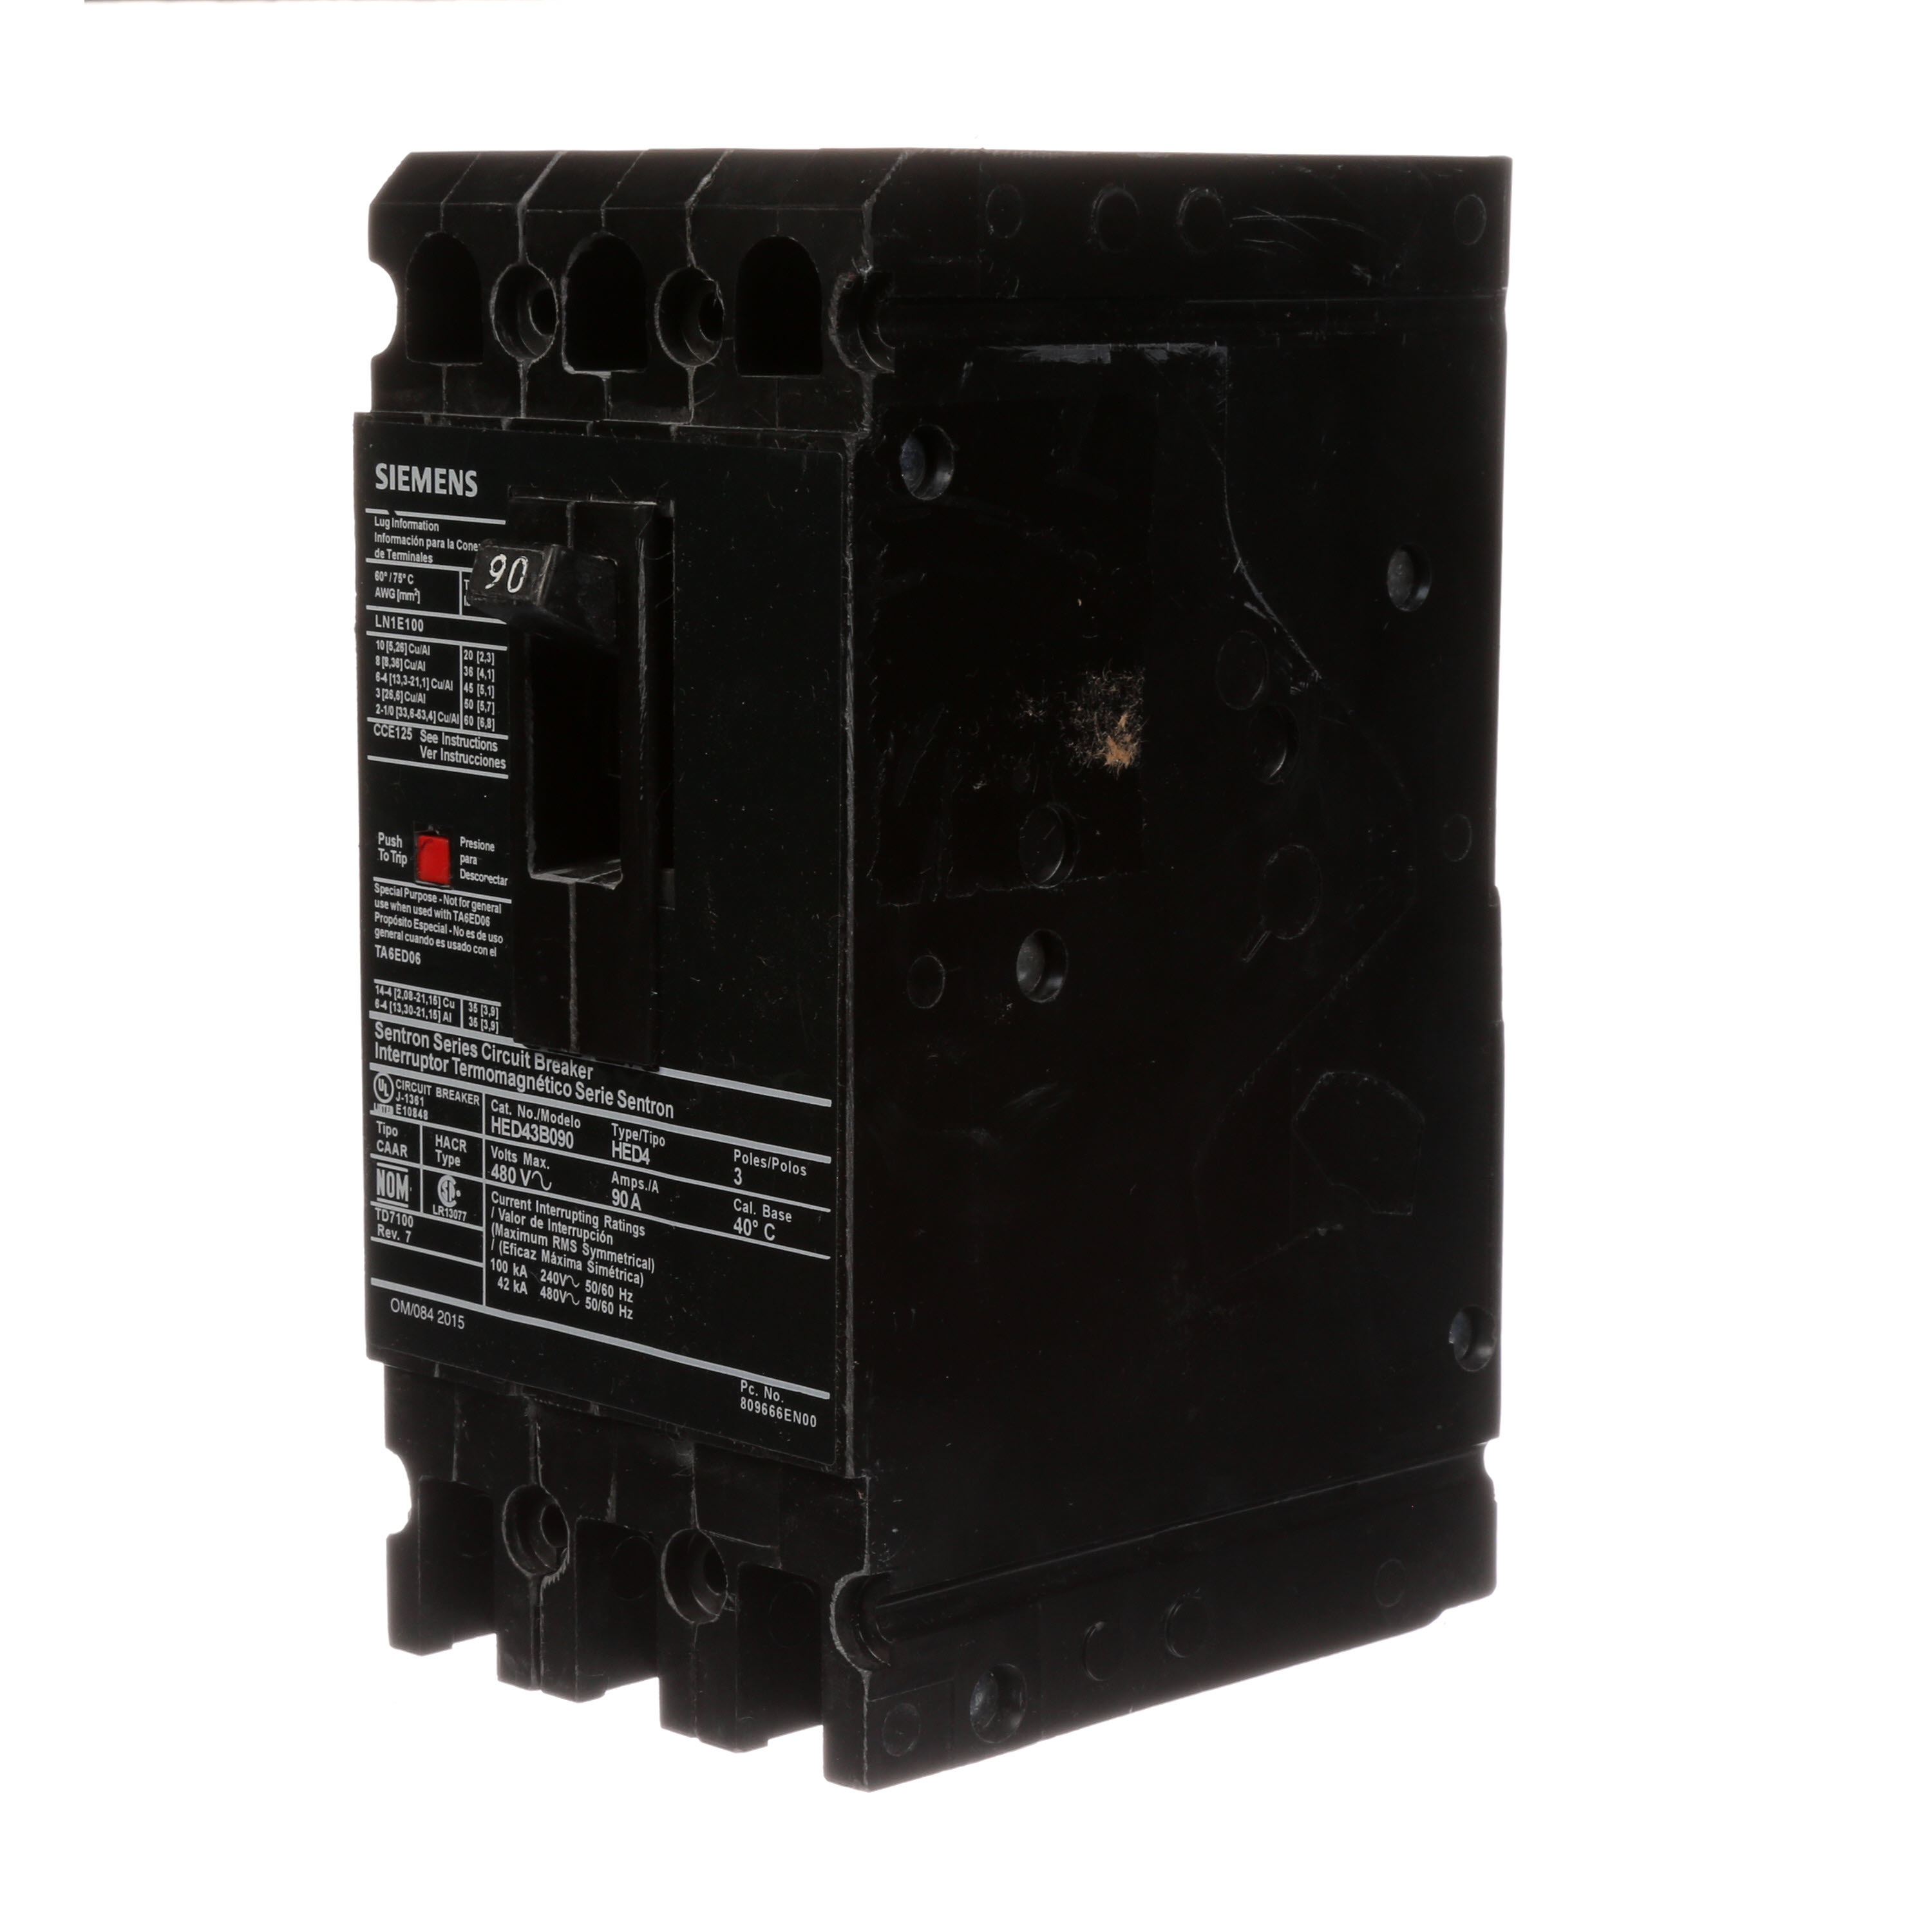 SIEMENS LOW VOLTAGE SENTRON MOLDED CASE CIRCUIT BREAKER WITH THERMAL - MAGNETICTRIP UNIT. STANDARD 40 DEG C BREAKER ED FRAME WITH HIGH BREAKING CAPACITY. 90A 3-POLE (42KAIC AT 480V). NON-INTERCHANGEABLE TRIP UNIT. SPECIAL FEATURES LOAD LUGS ONLY (LN1E100) WIRE RANGE 10 - 1/0AWG (CU/AL). DIMENSIONS (W x H x D) IN 3.00x 6.4 x 3.92.